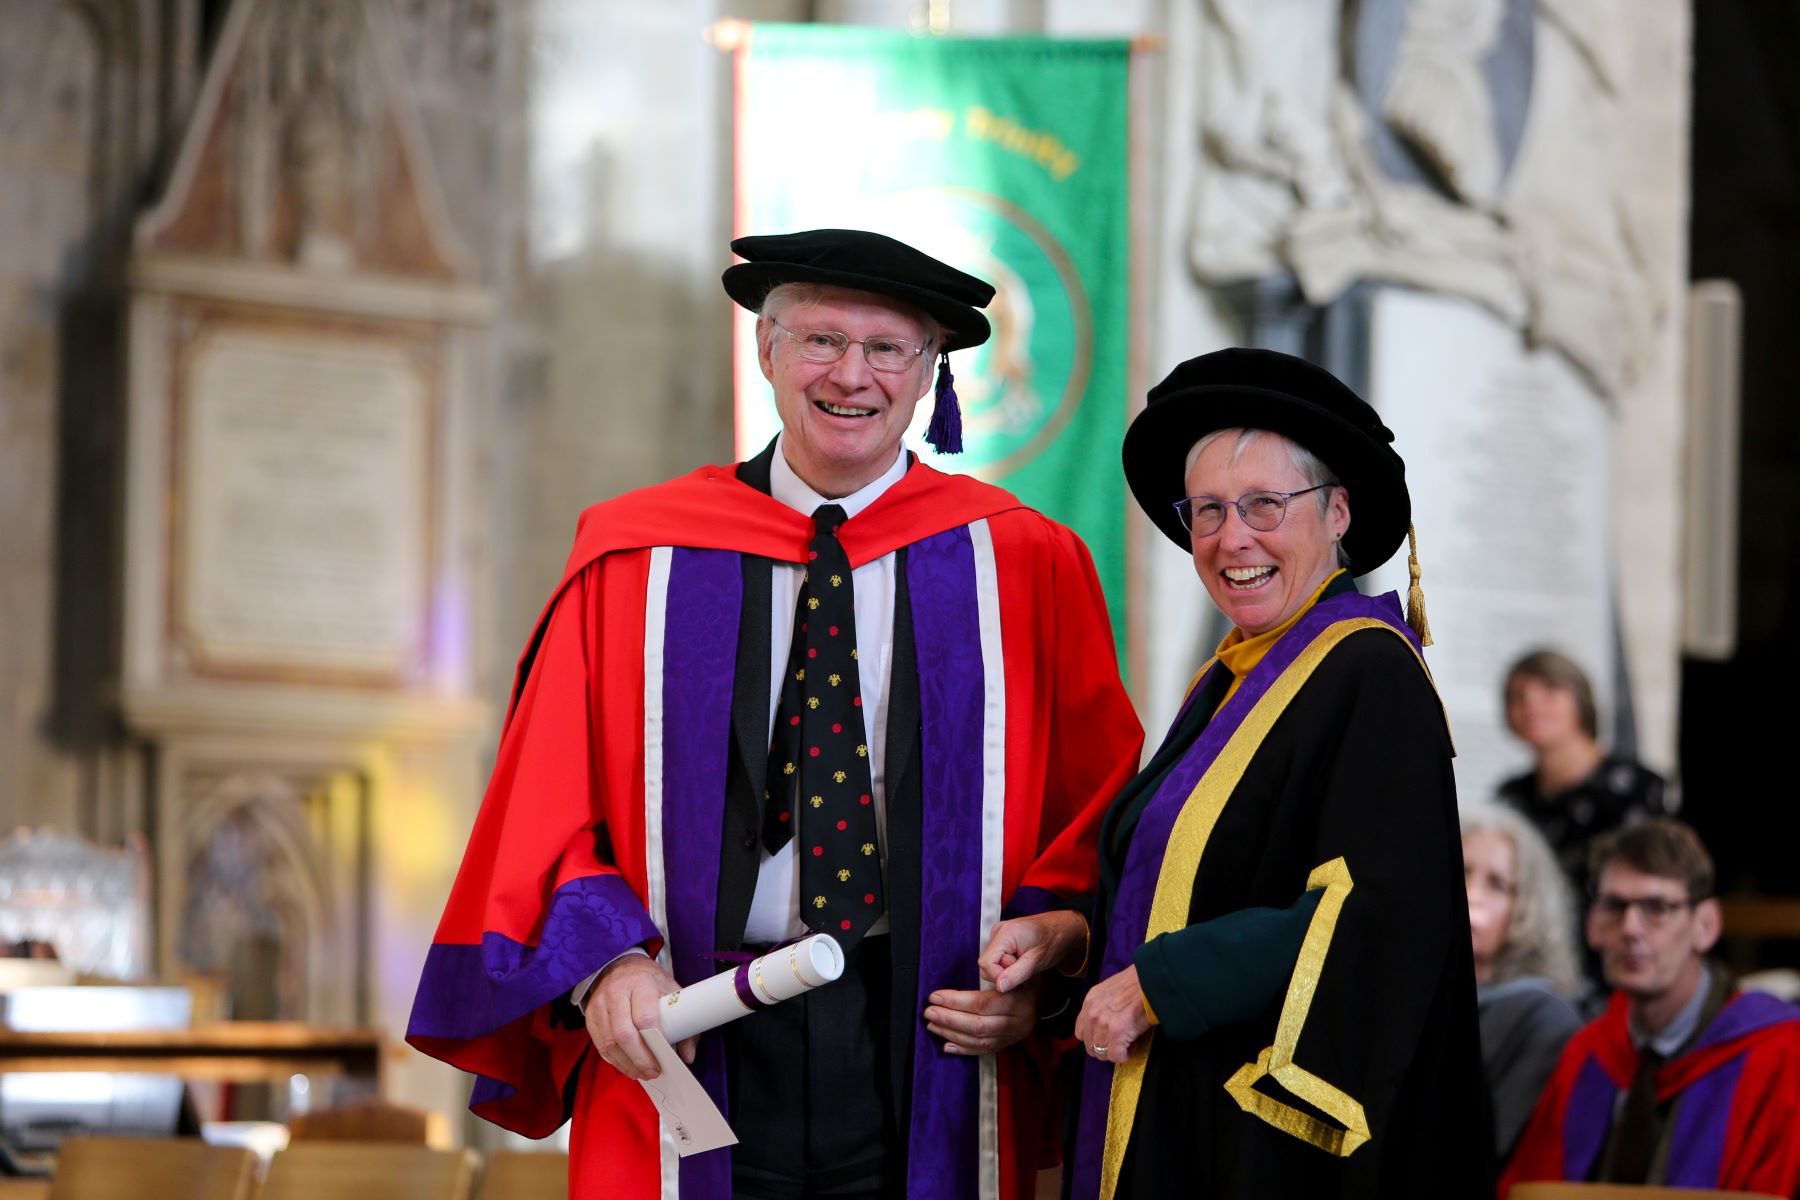 A man and woman in colourful academic robes